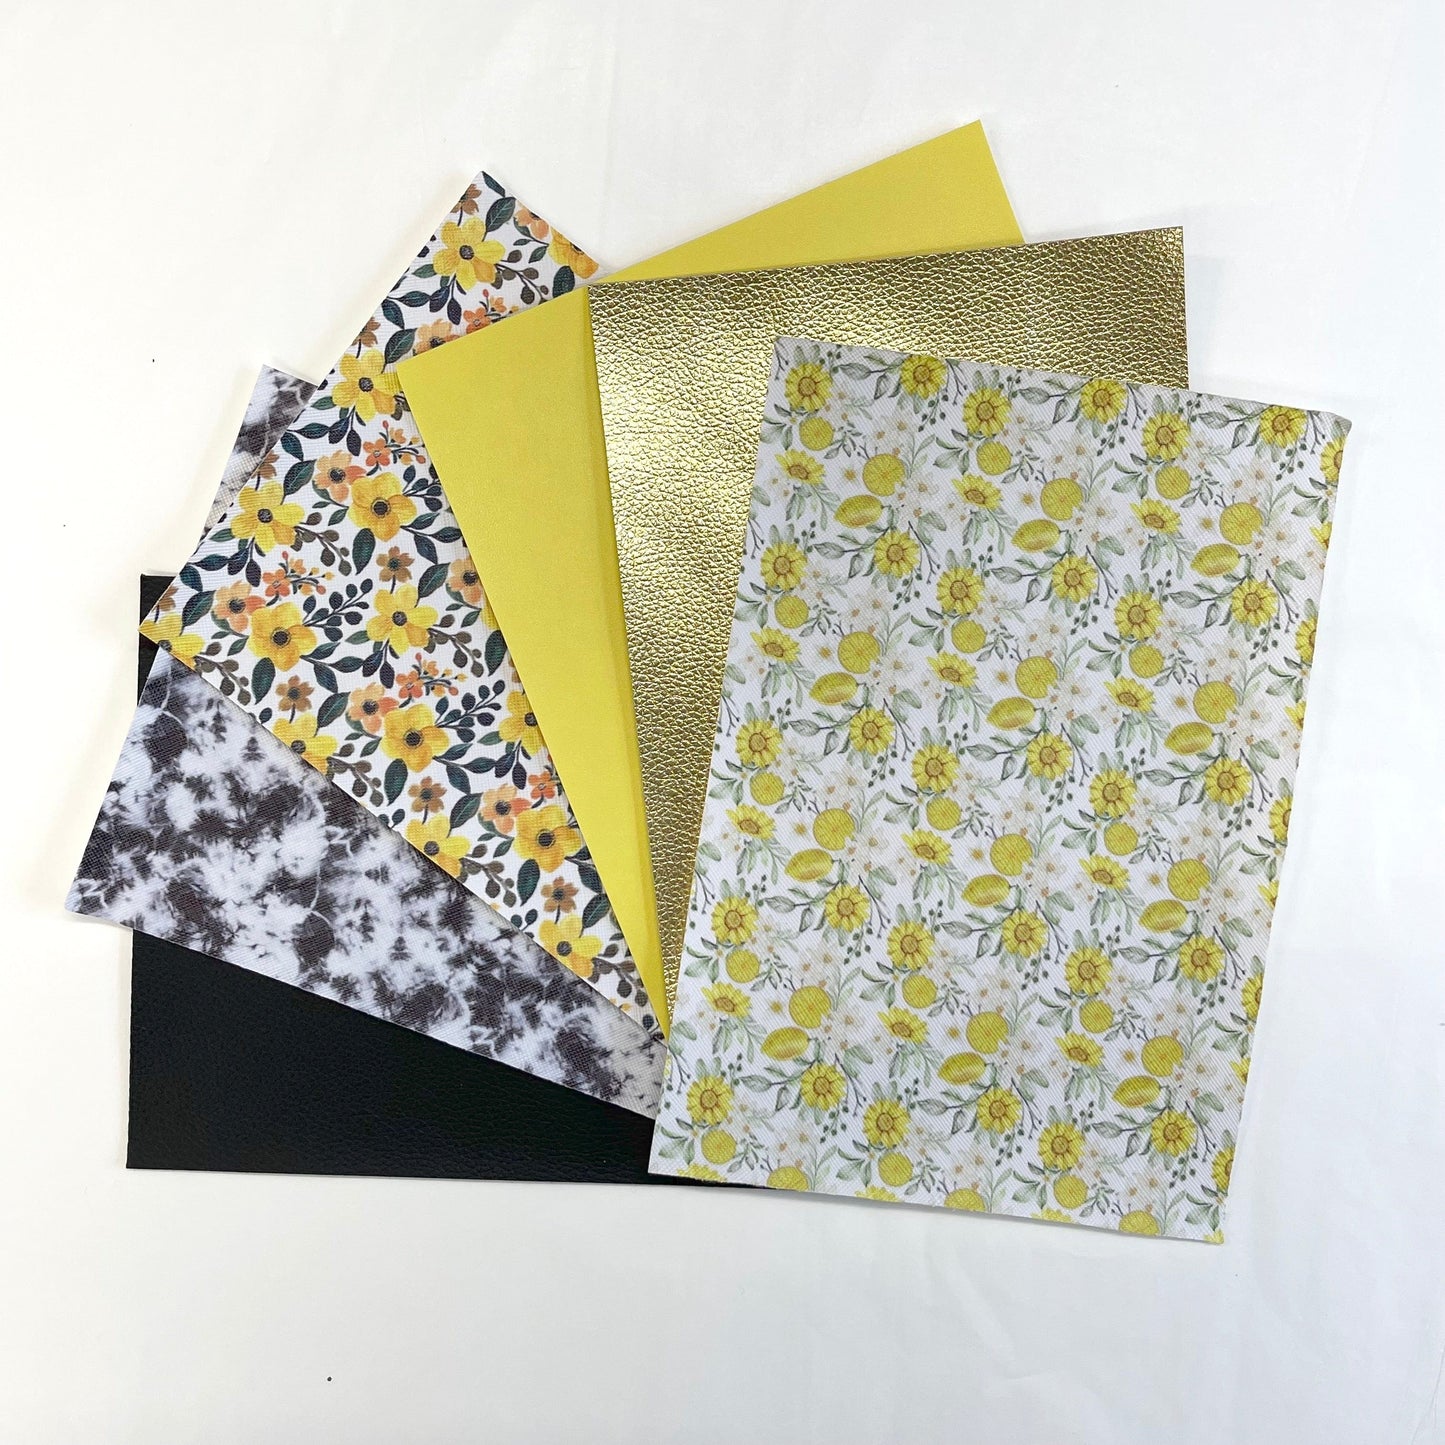 Leatherette Promotions Bumble Bees Kit Themed or Random Mystery: 6 Leatherette Half Sheet (15*20cm) Set, Summer Promotions